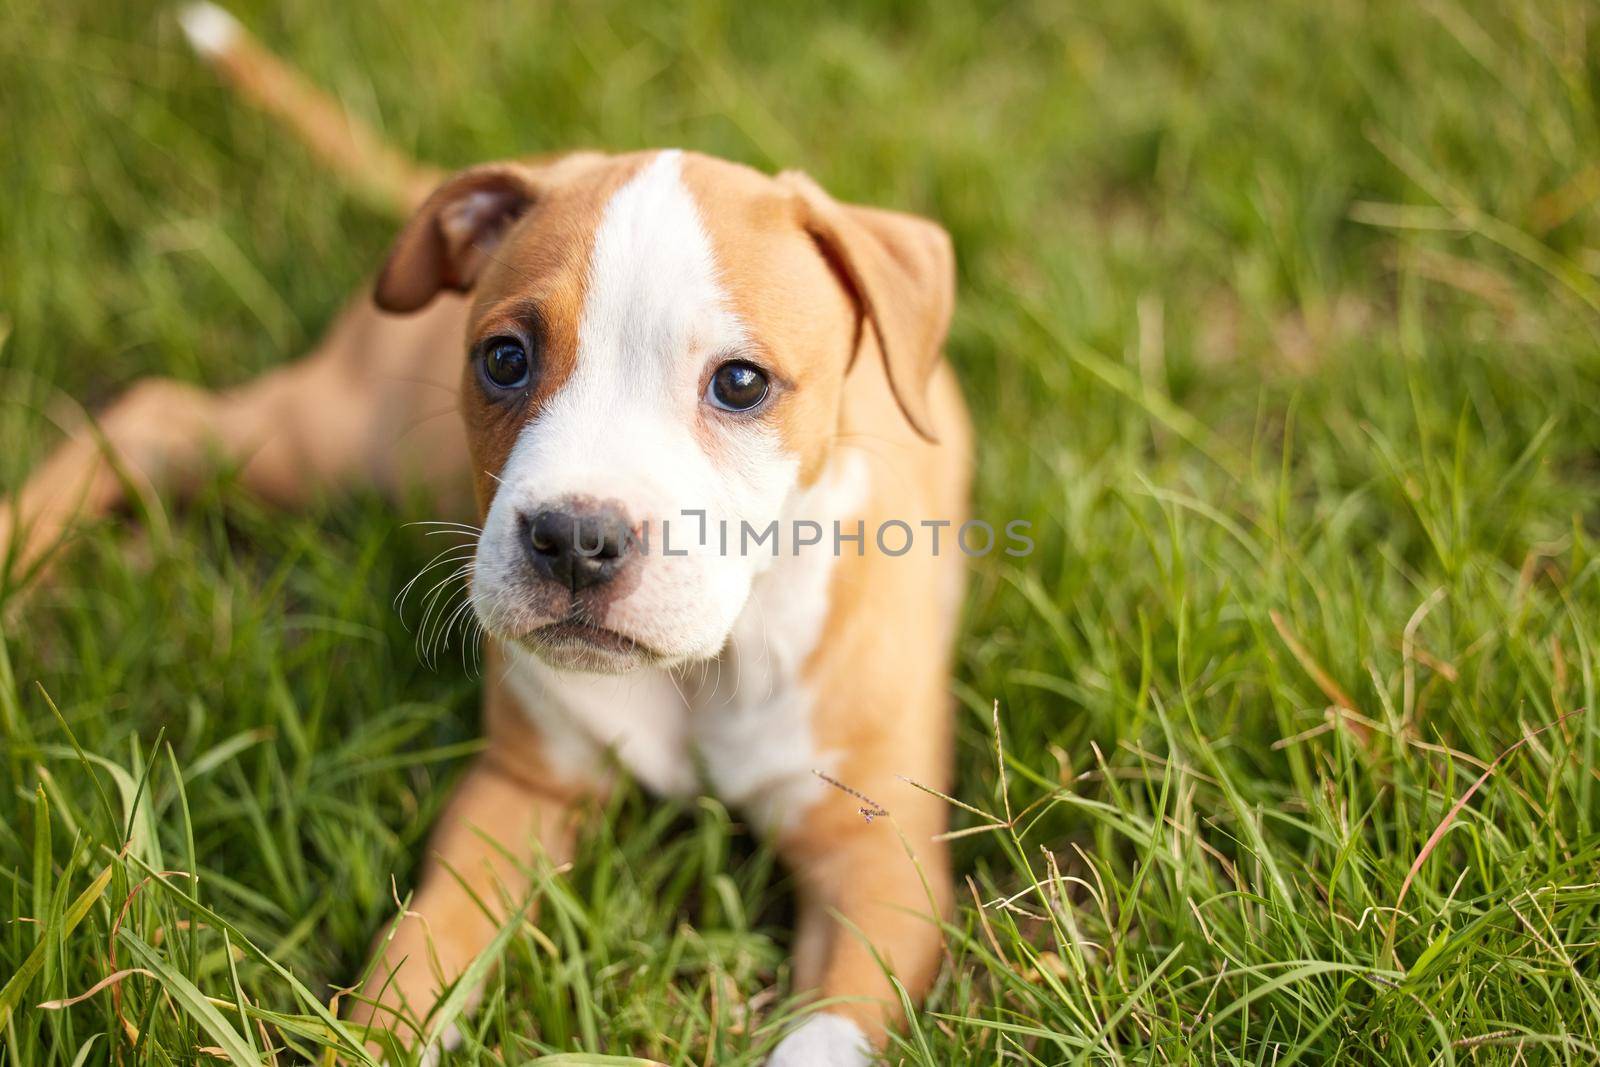 Man,chasing my tail was exhasuting. Shot of young puppy lying on the grass. by YuriArcurs